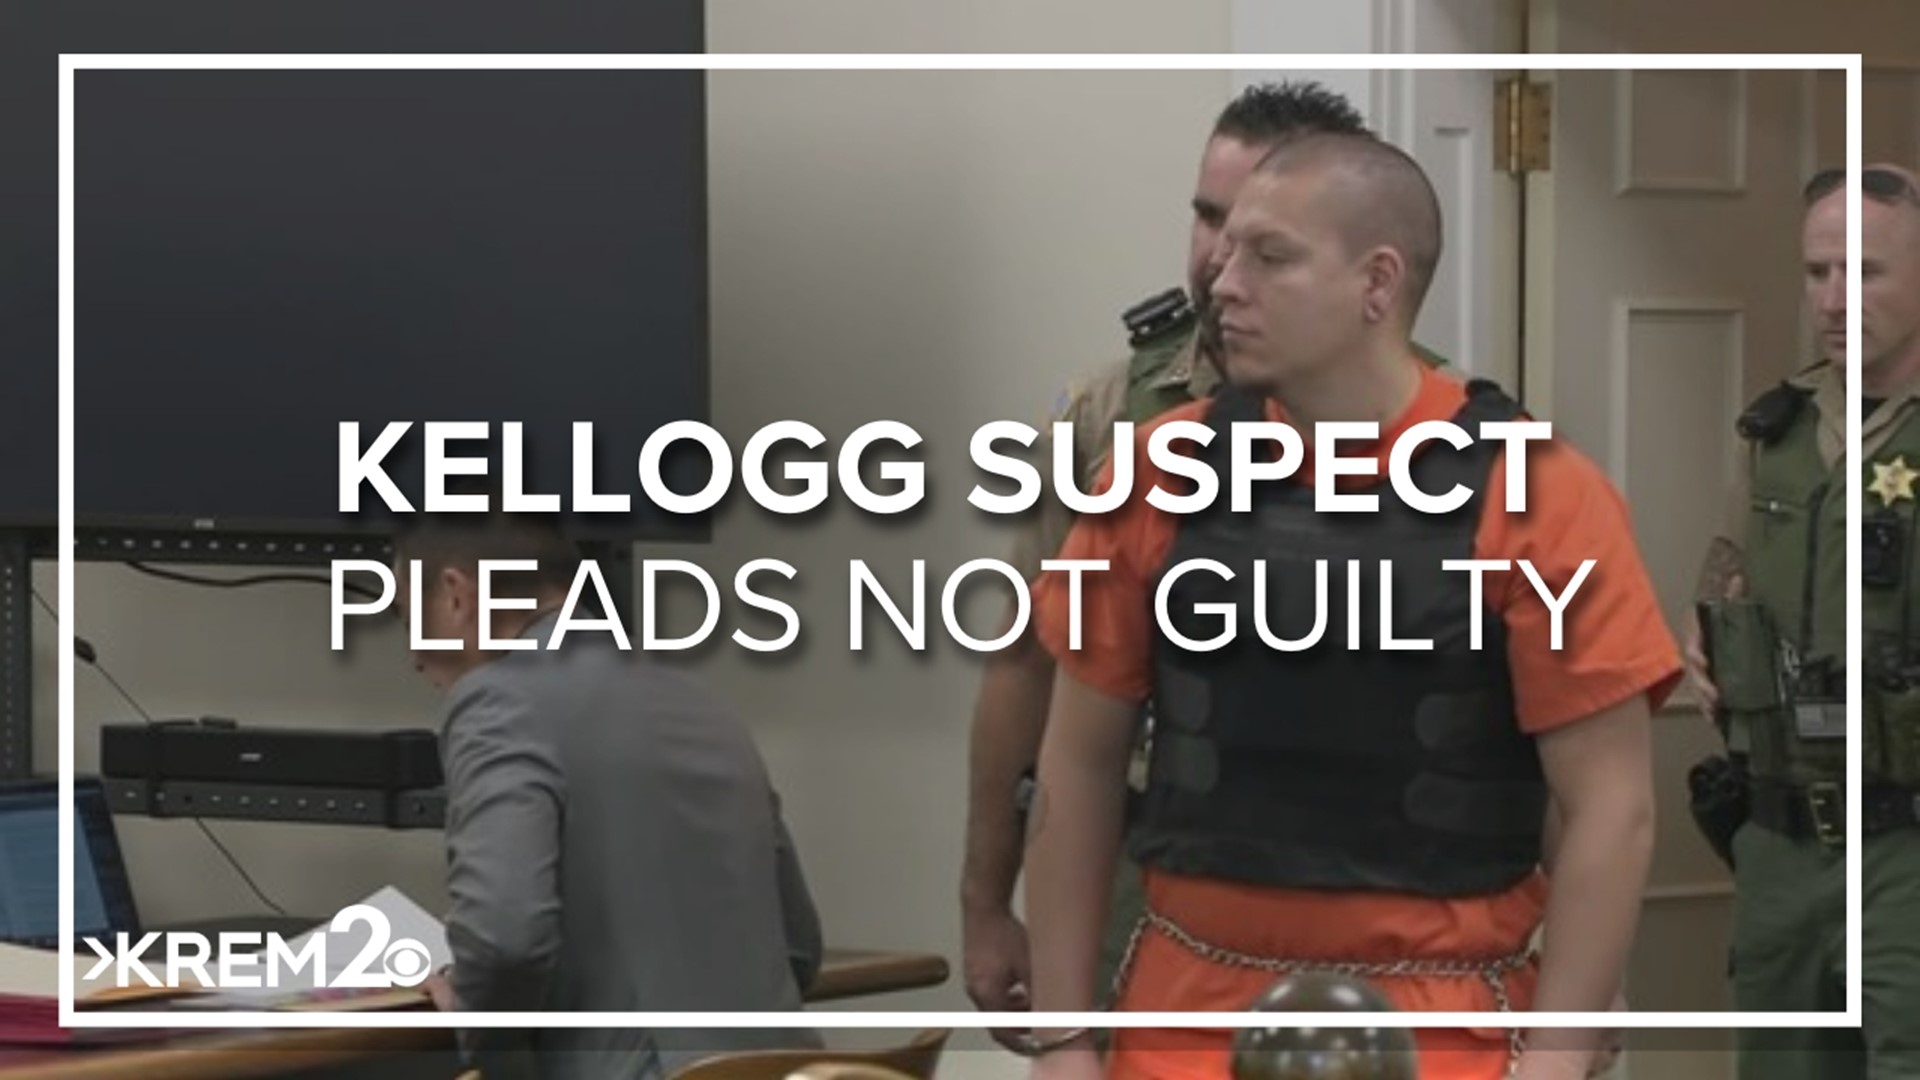 Majorjon Kaylor, 31, is charged with four counts of first-degree murder and one count of burglary. On Wednesday, he pleaded not guilty to all five charges.